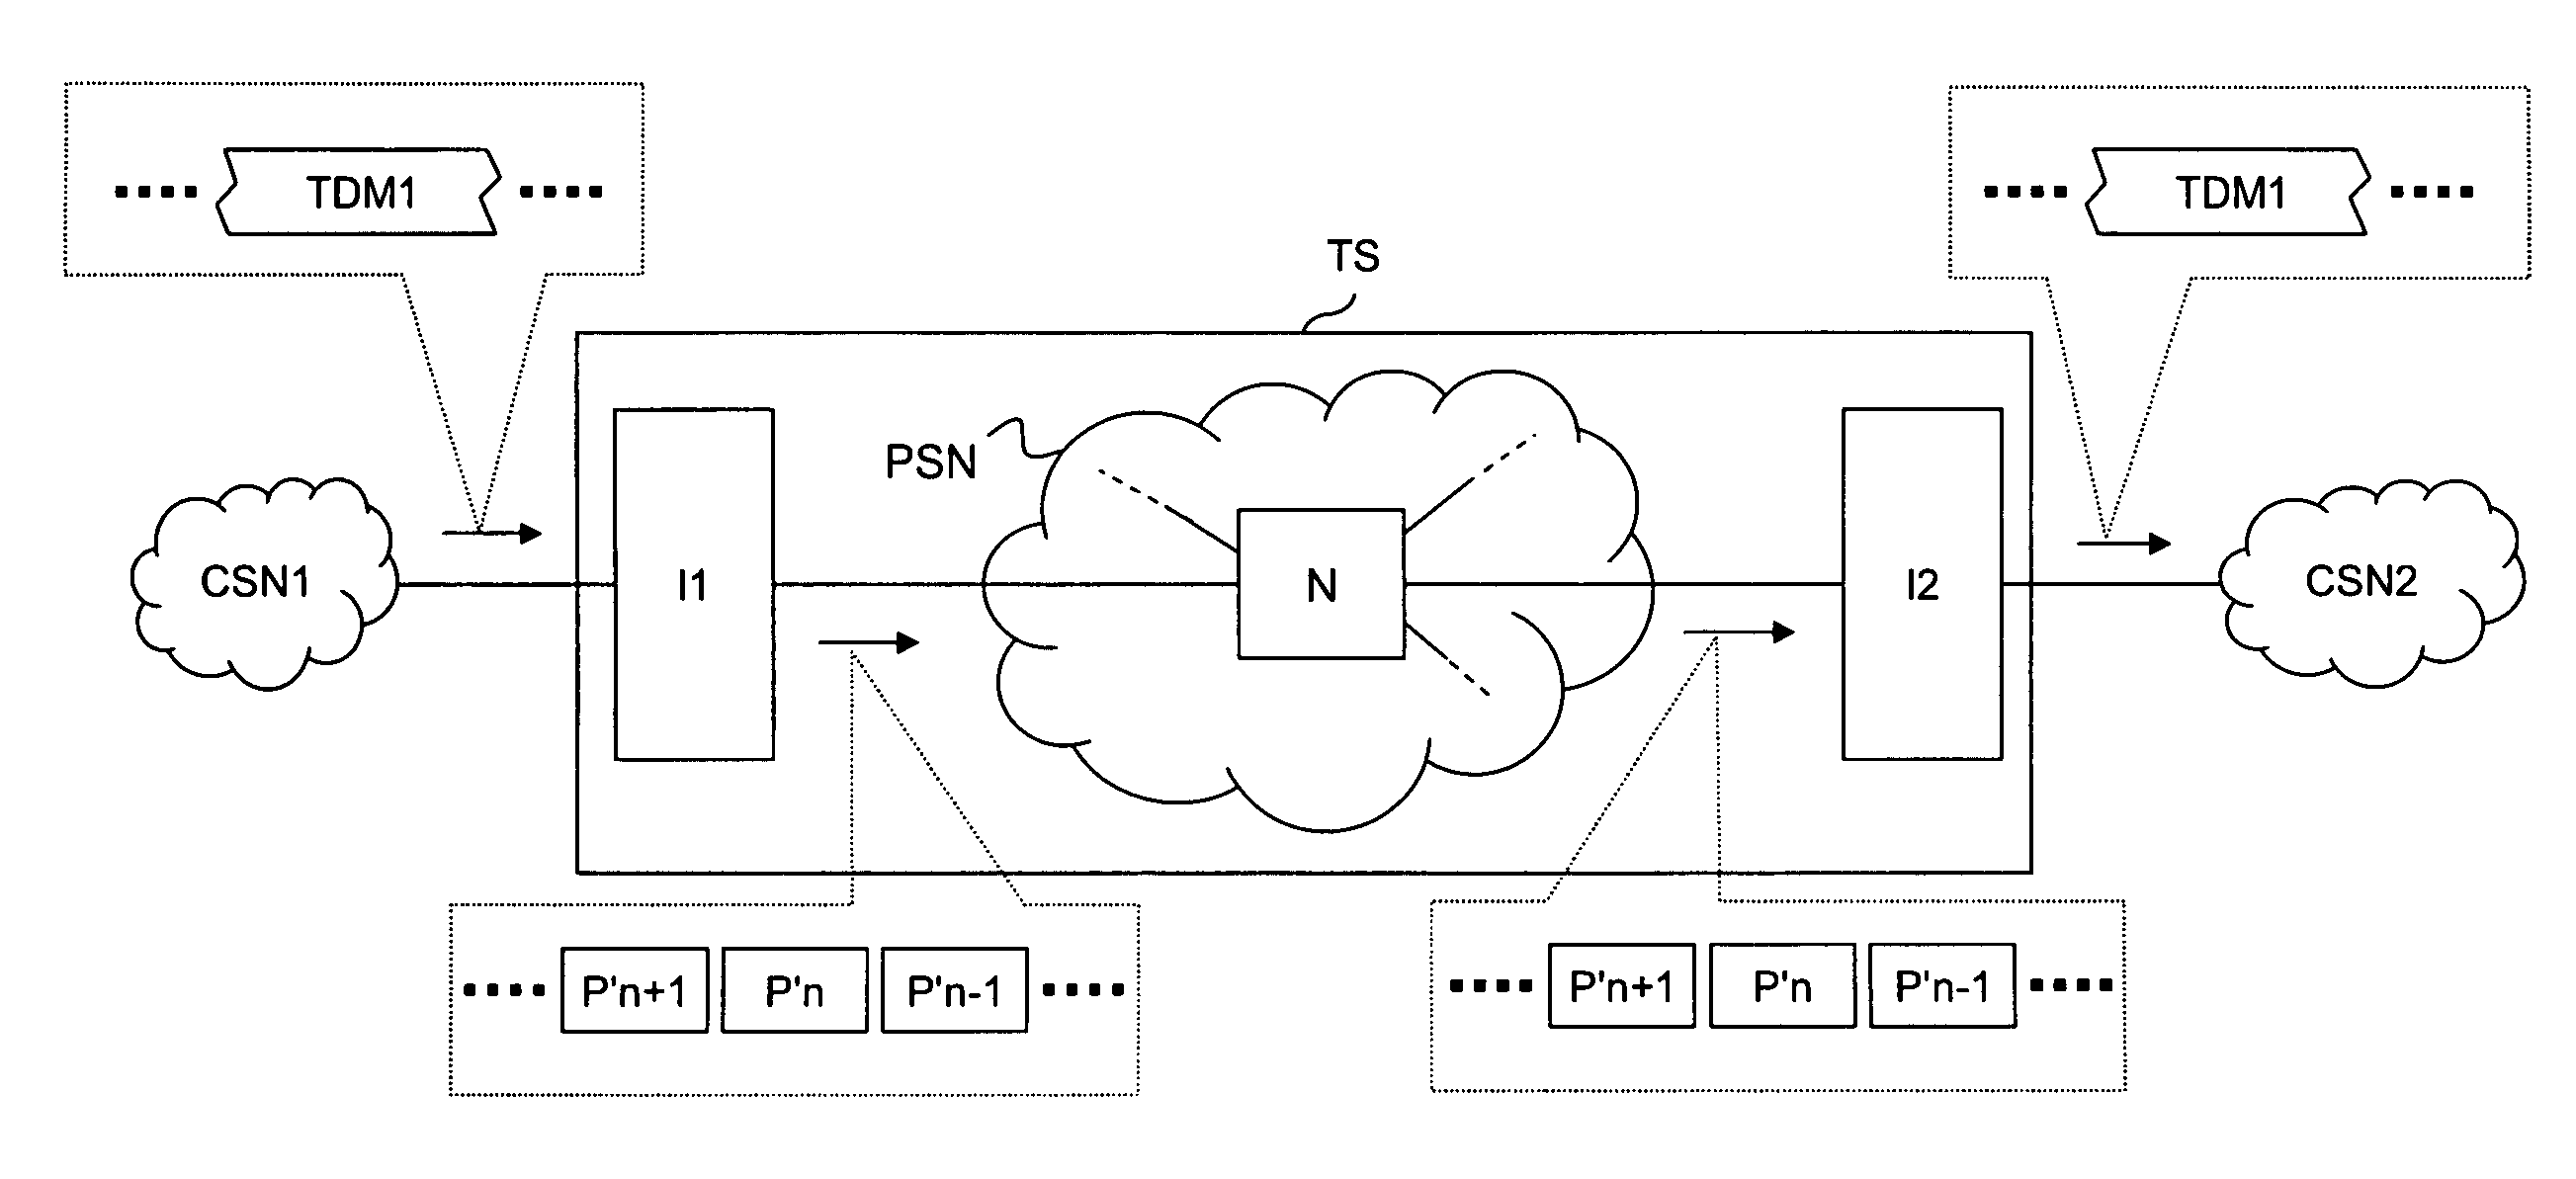 Circuit emulation service method and telecommunication system for implementing the method